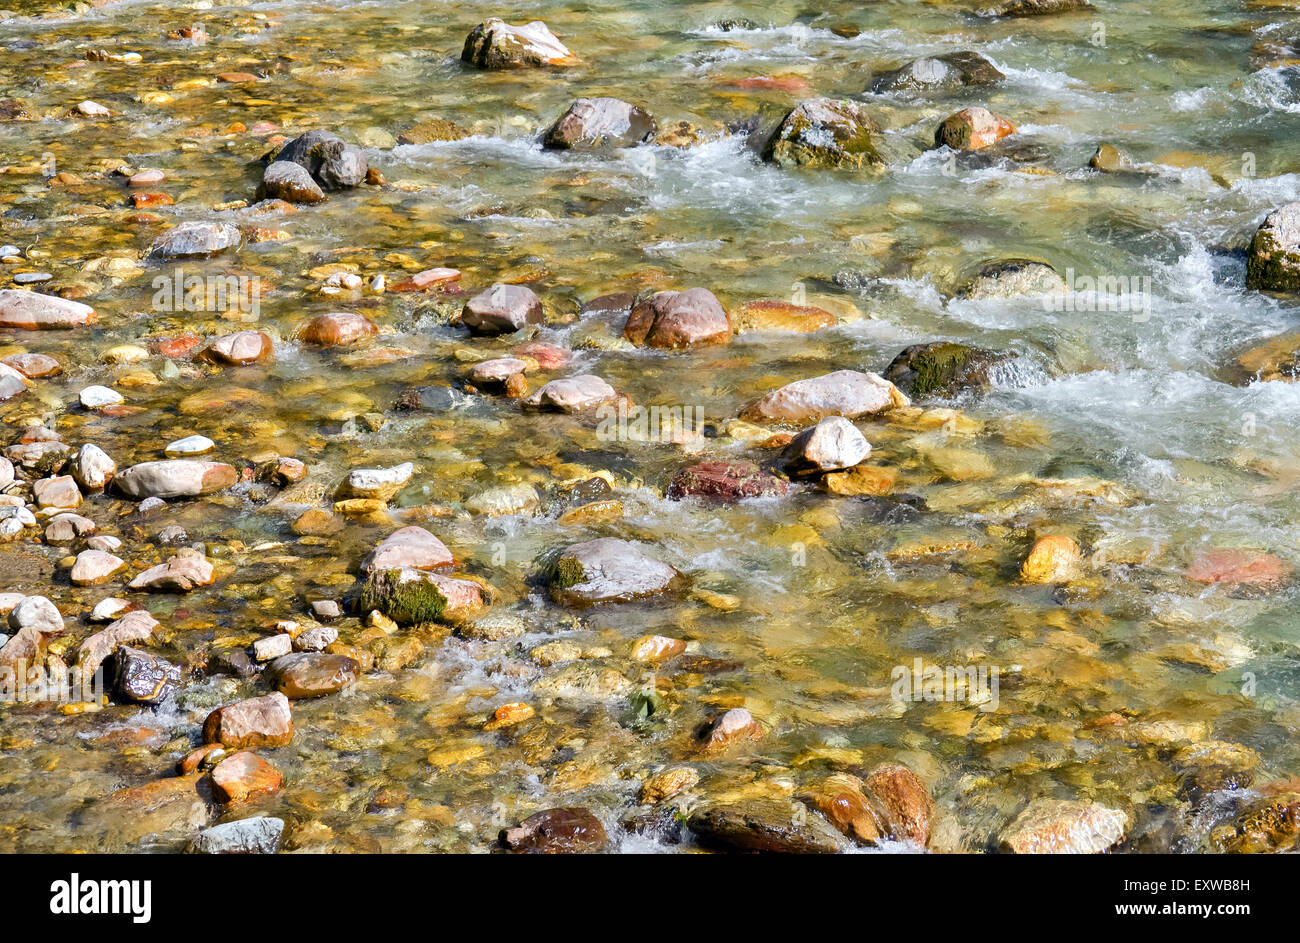 Closeup of clean water and rapids of the river with colorful stones Stock Photo